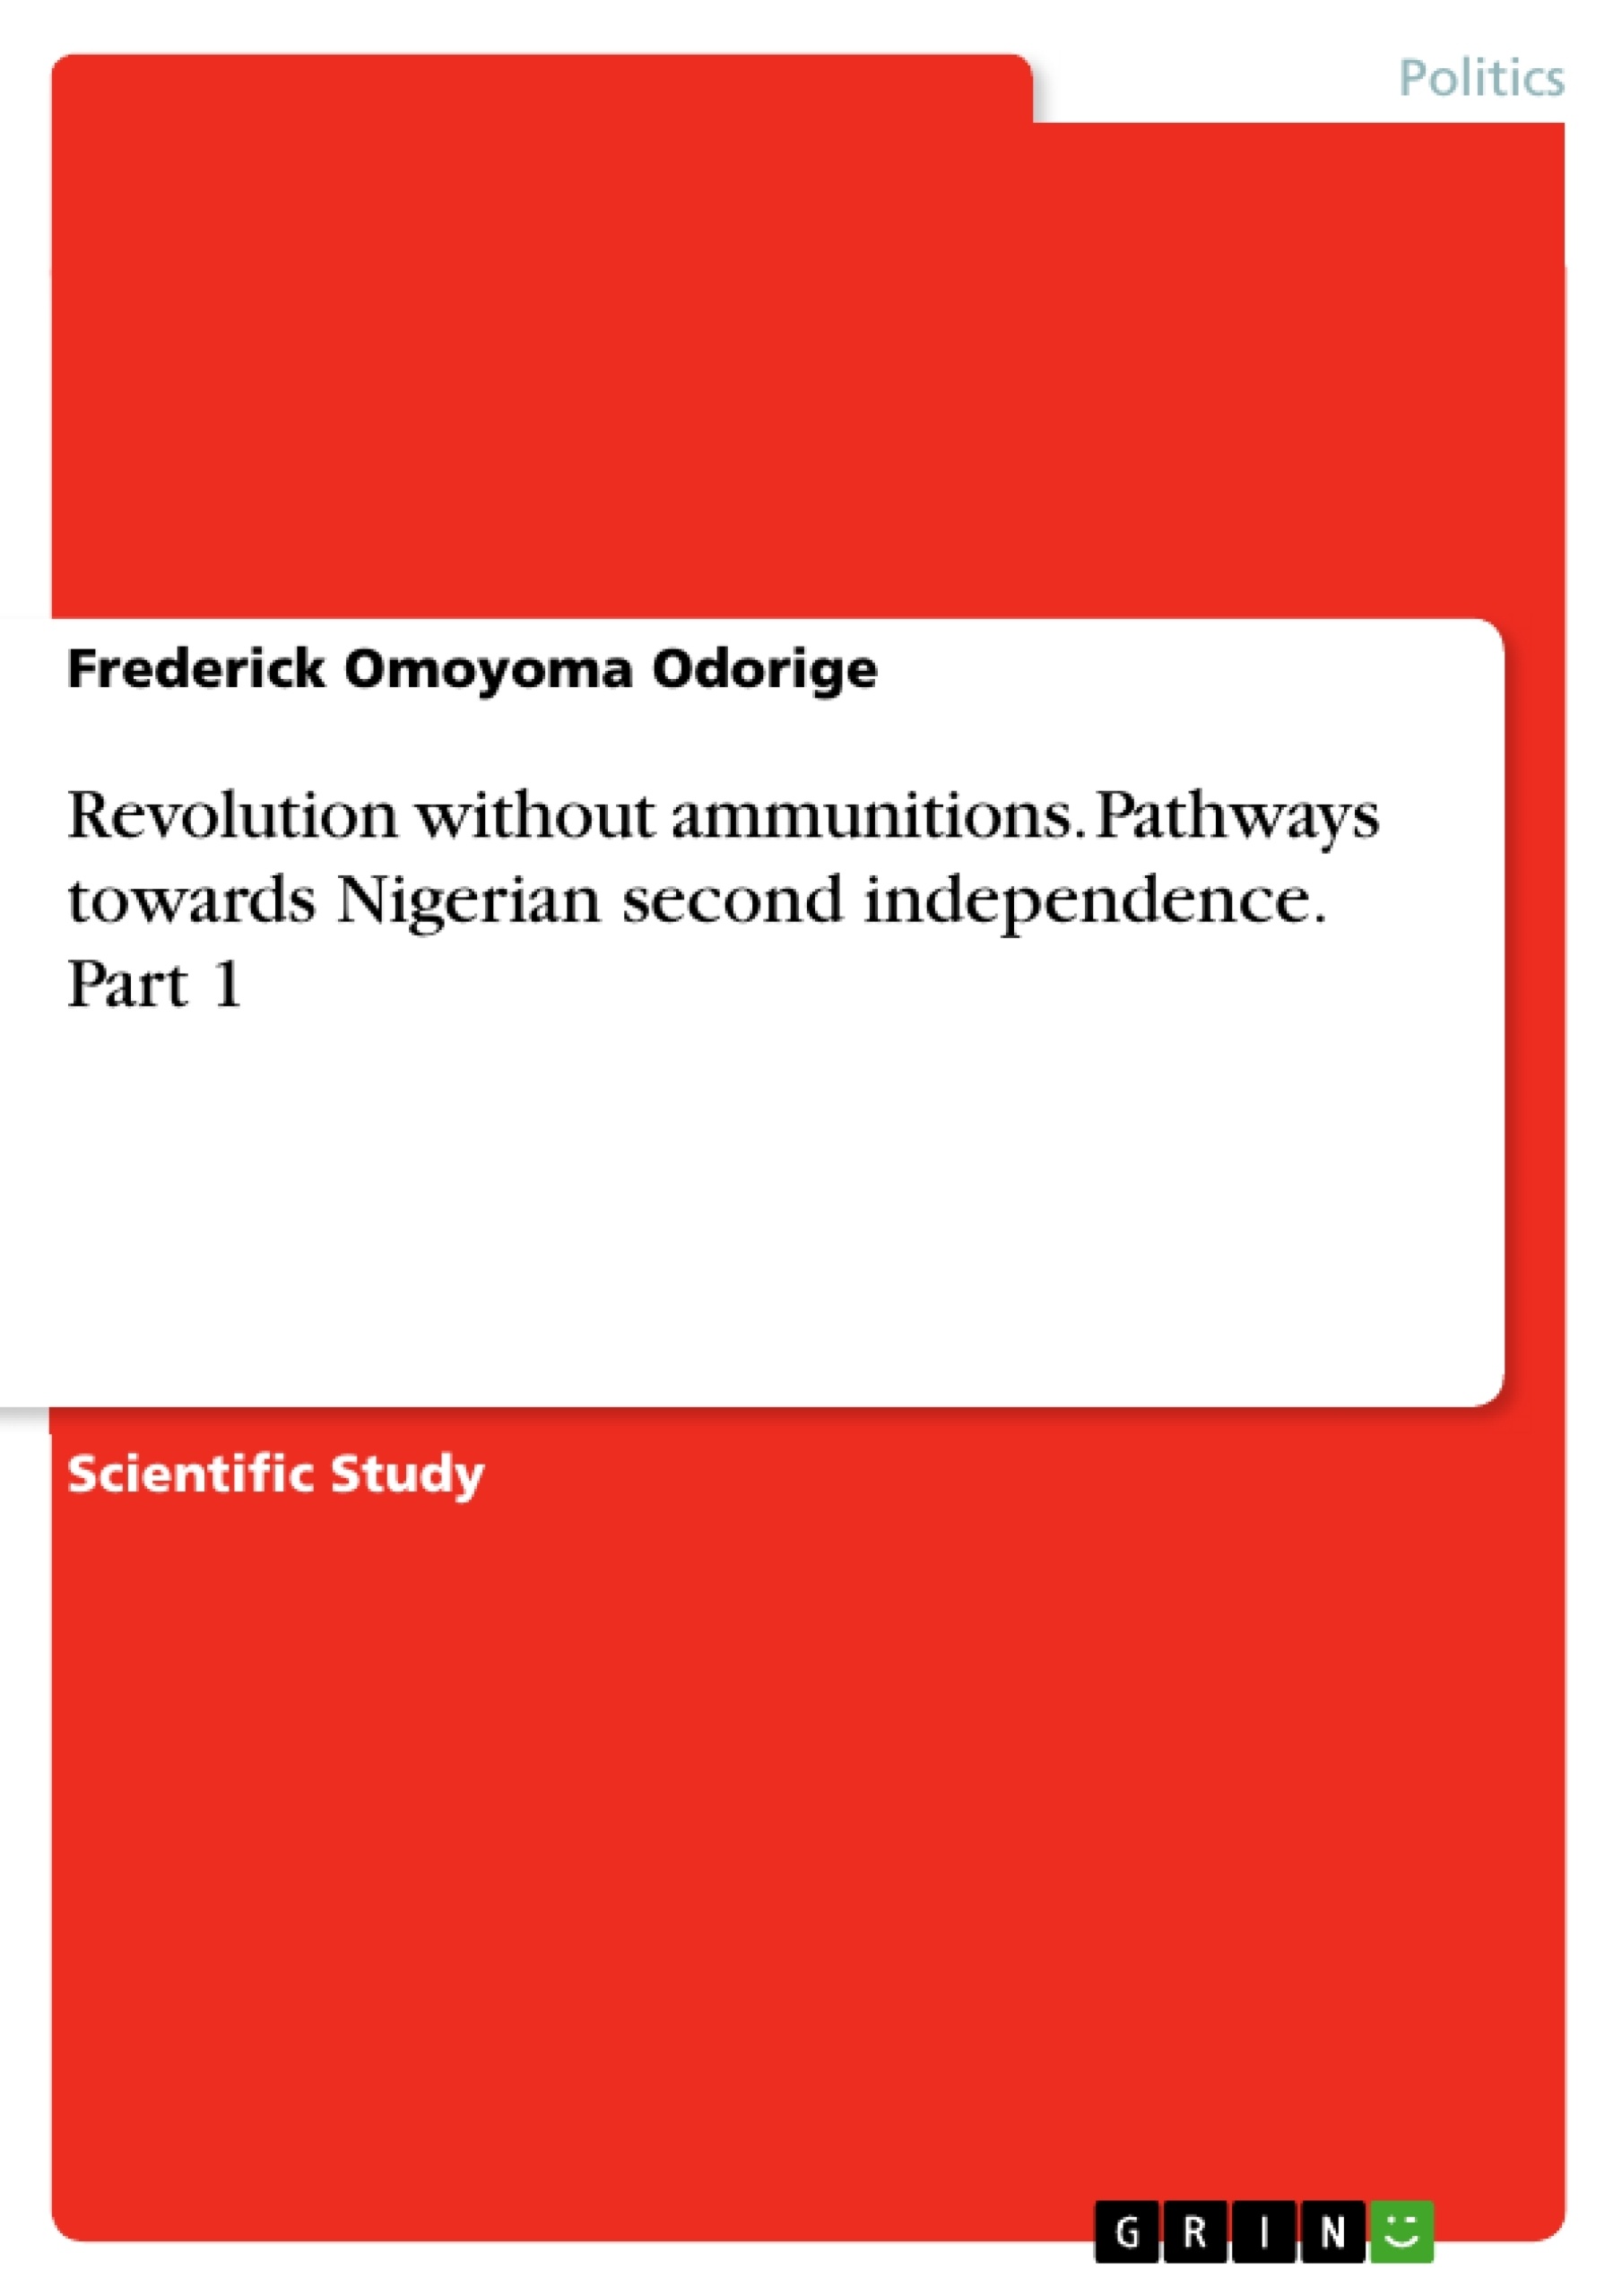 Título: Revolution without ammunitions. Pathways towards Nigerian second independence. Part 1